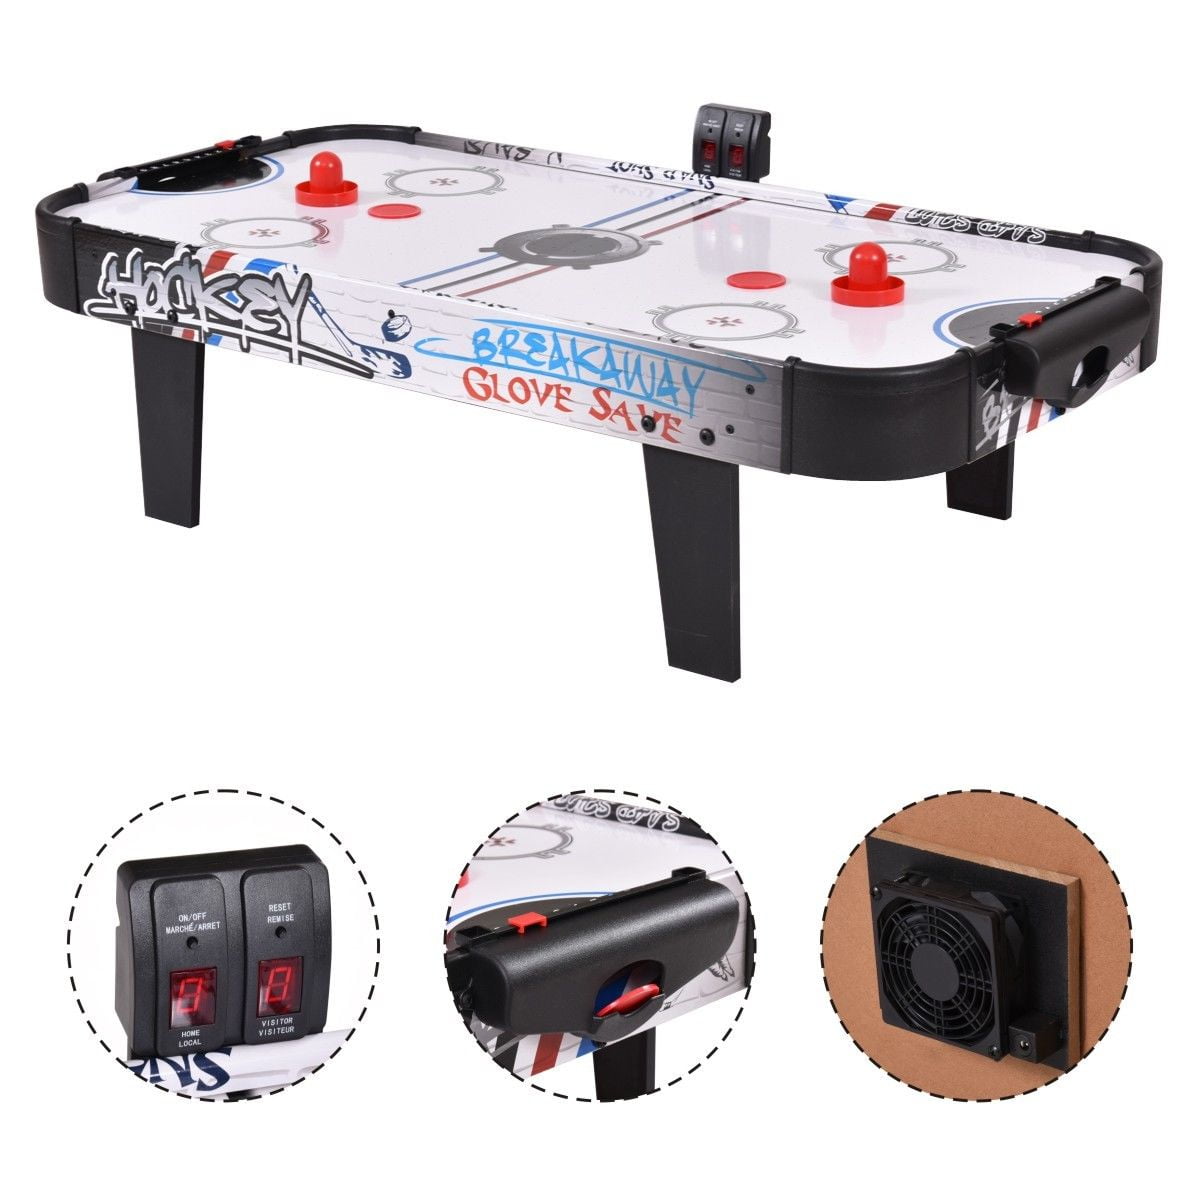 YDDS 38 Inch Tabletop Air Hockey Complete Air Hockey Table Set w/LED Electronic Scorer Lightweight Fun Table Game for Kids 2 Puck 2 Paddles Teens 